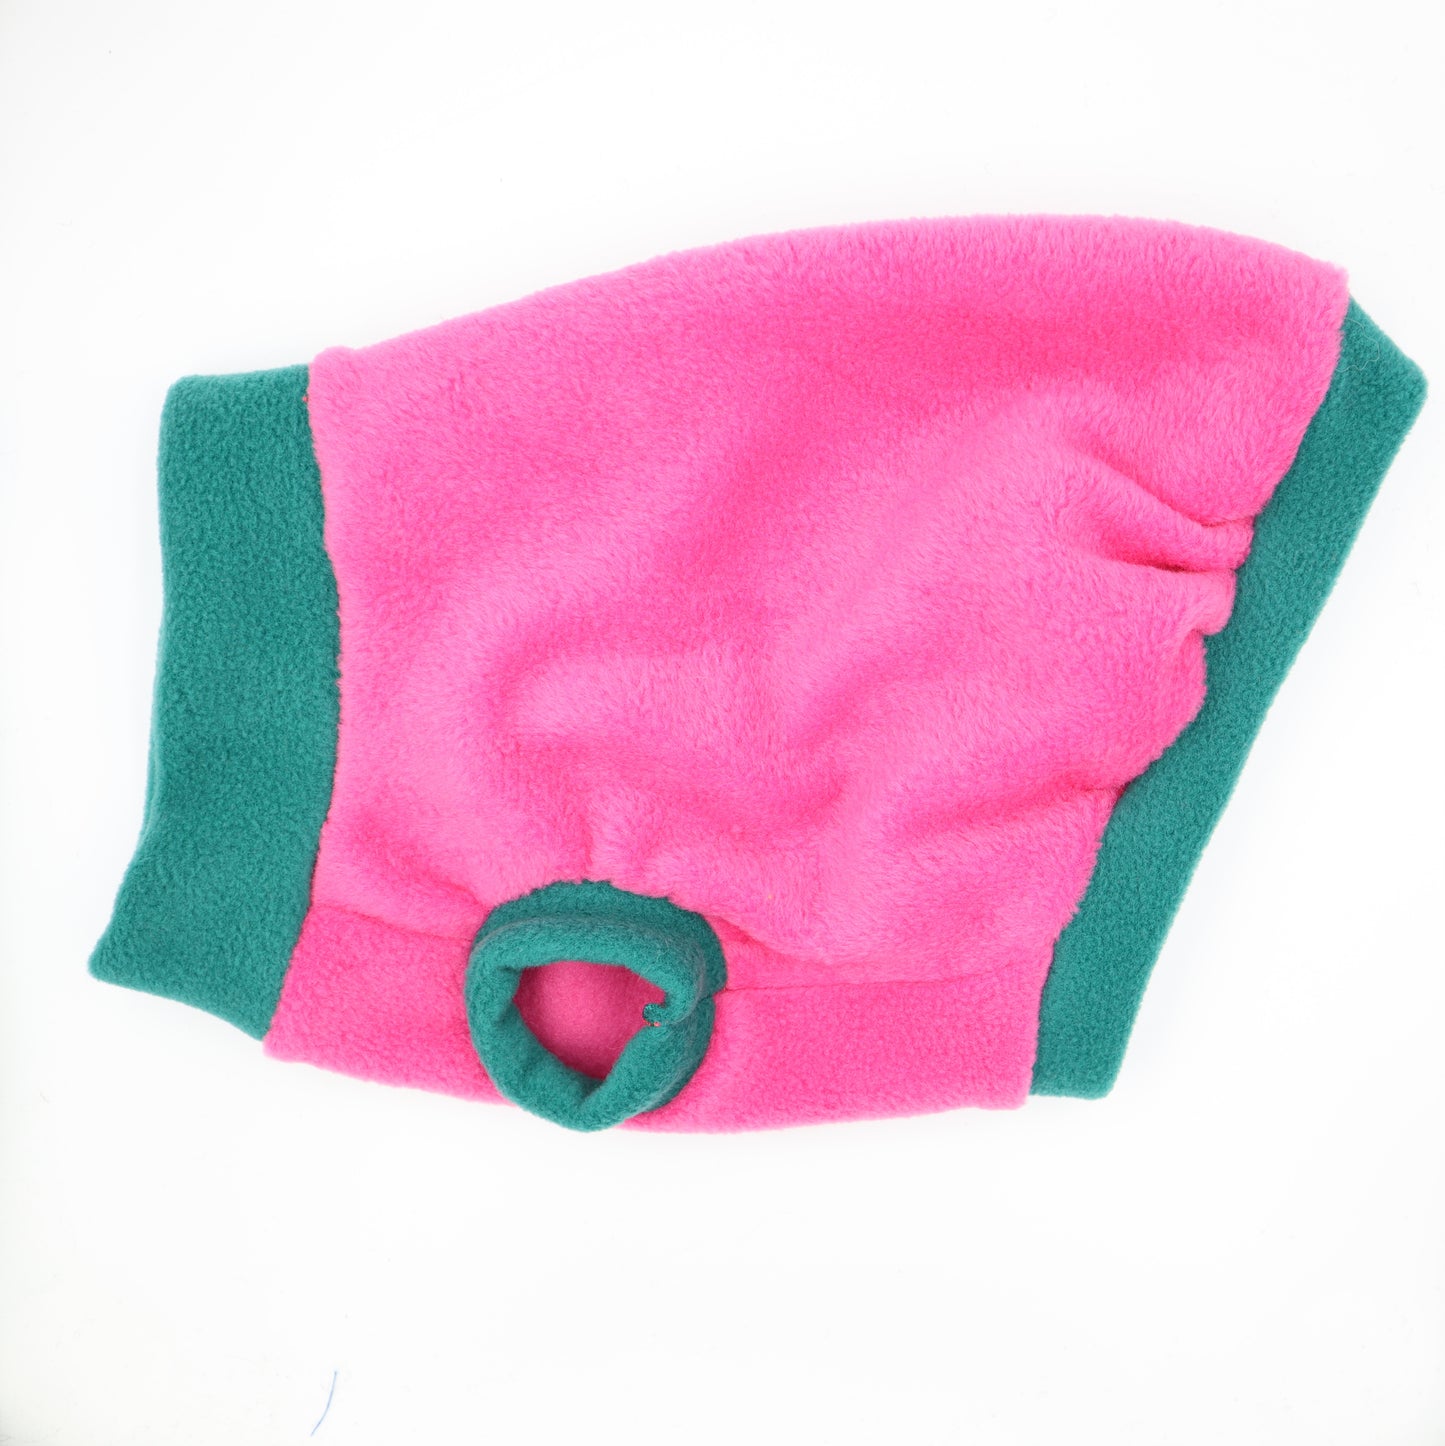 Dog Fleece Tank Top in Bright Pink and Teal